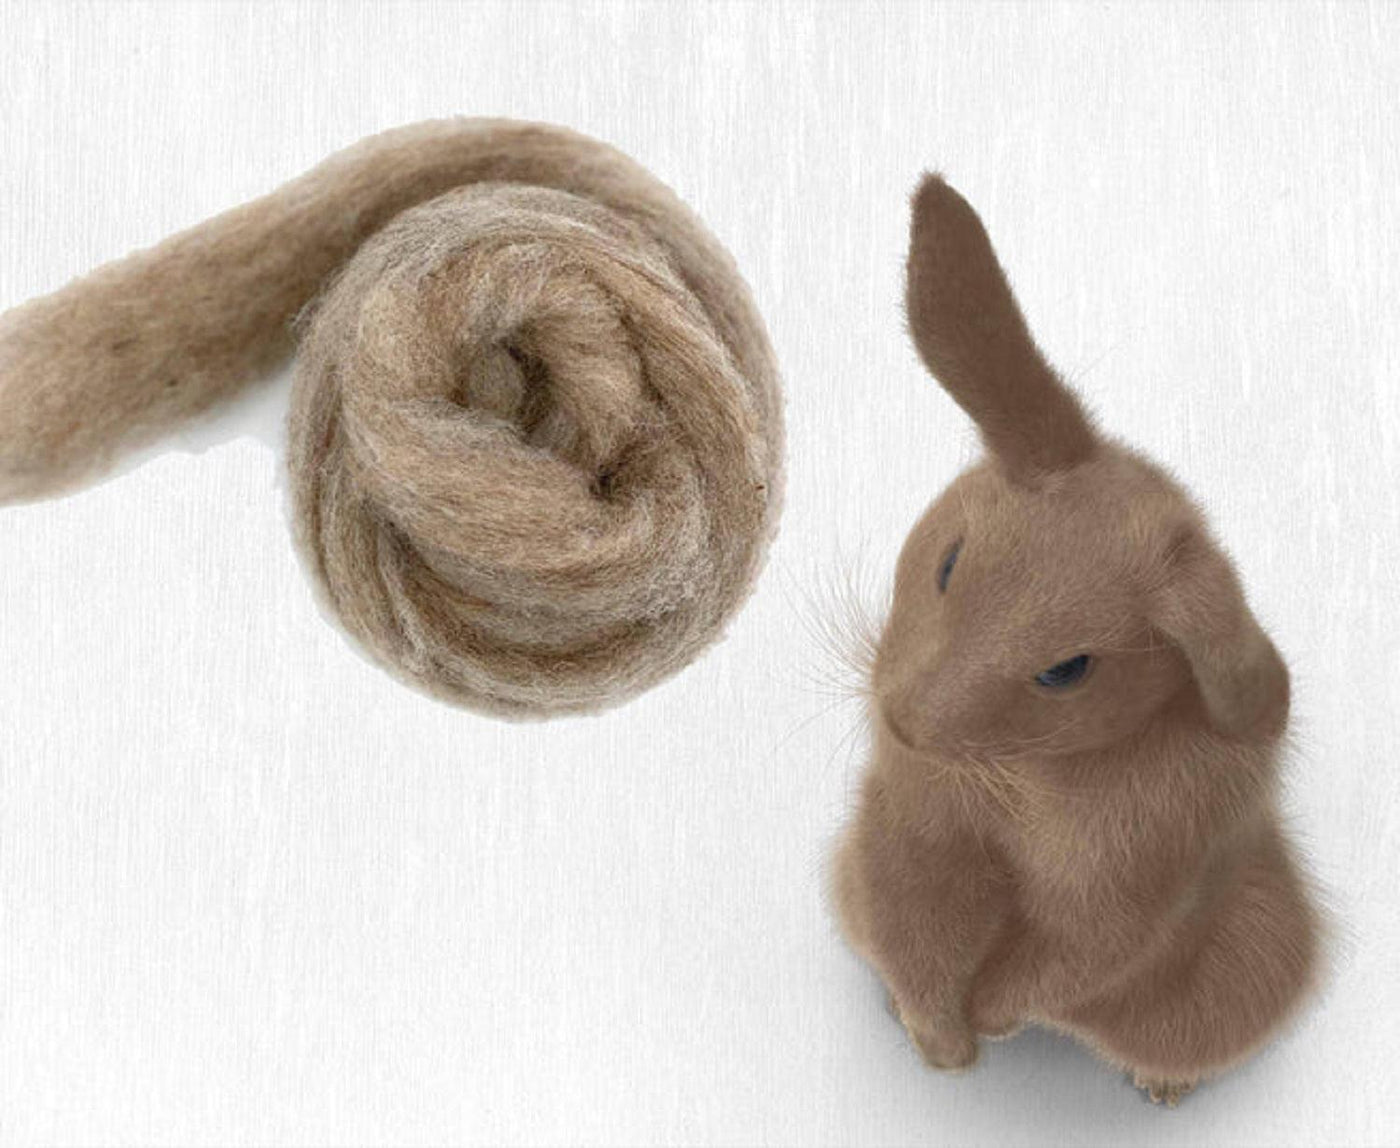 Carded Sliver Corriedale Wool - Furry Friends